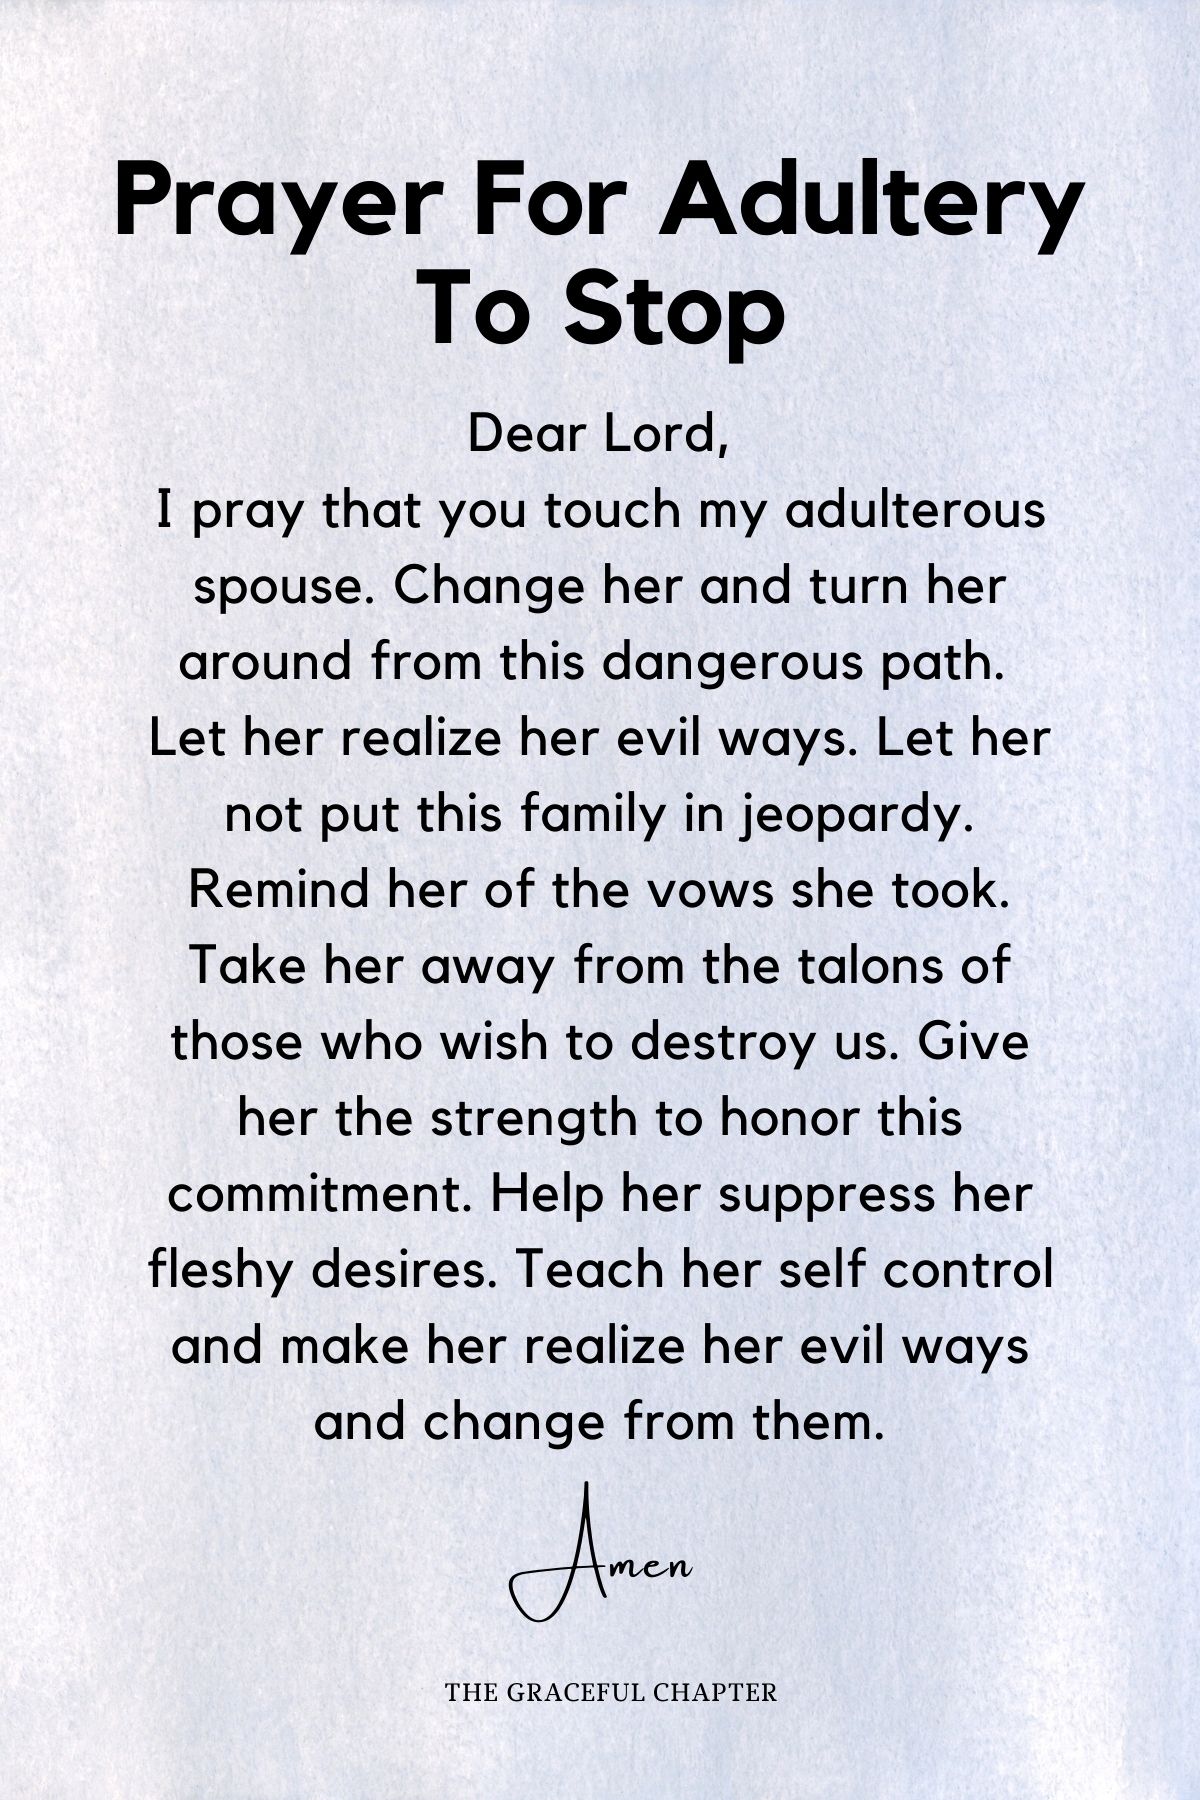 Prayer for adultery to stop